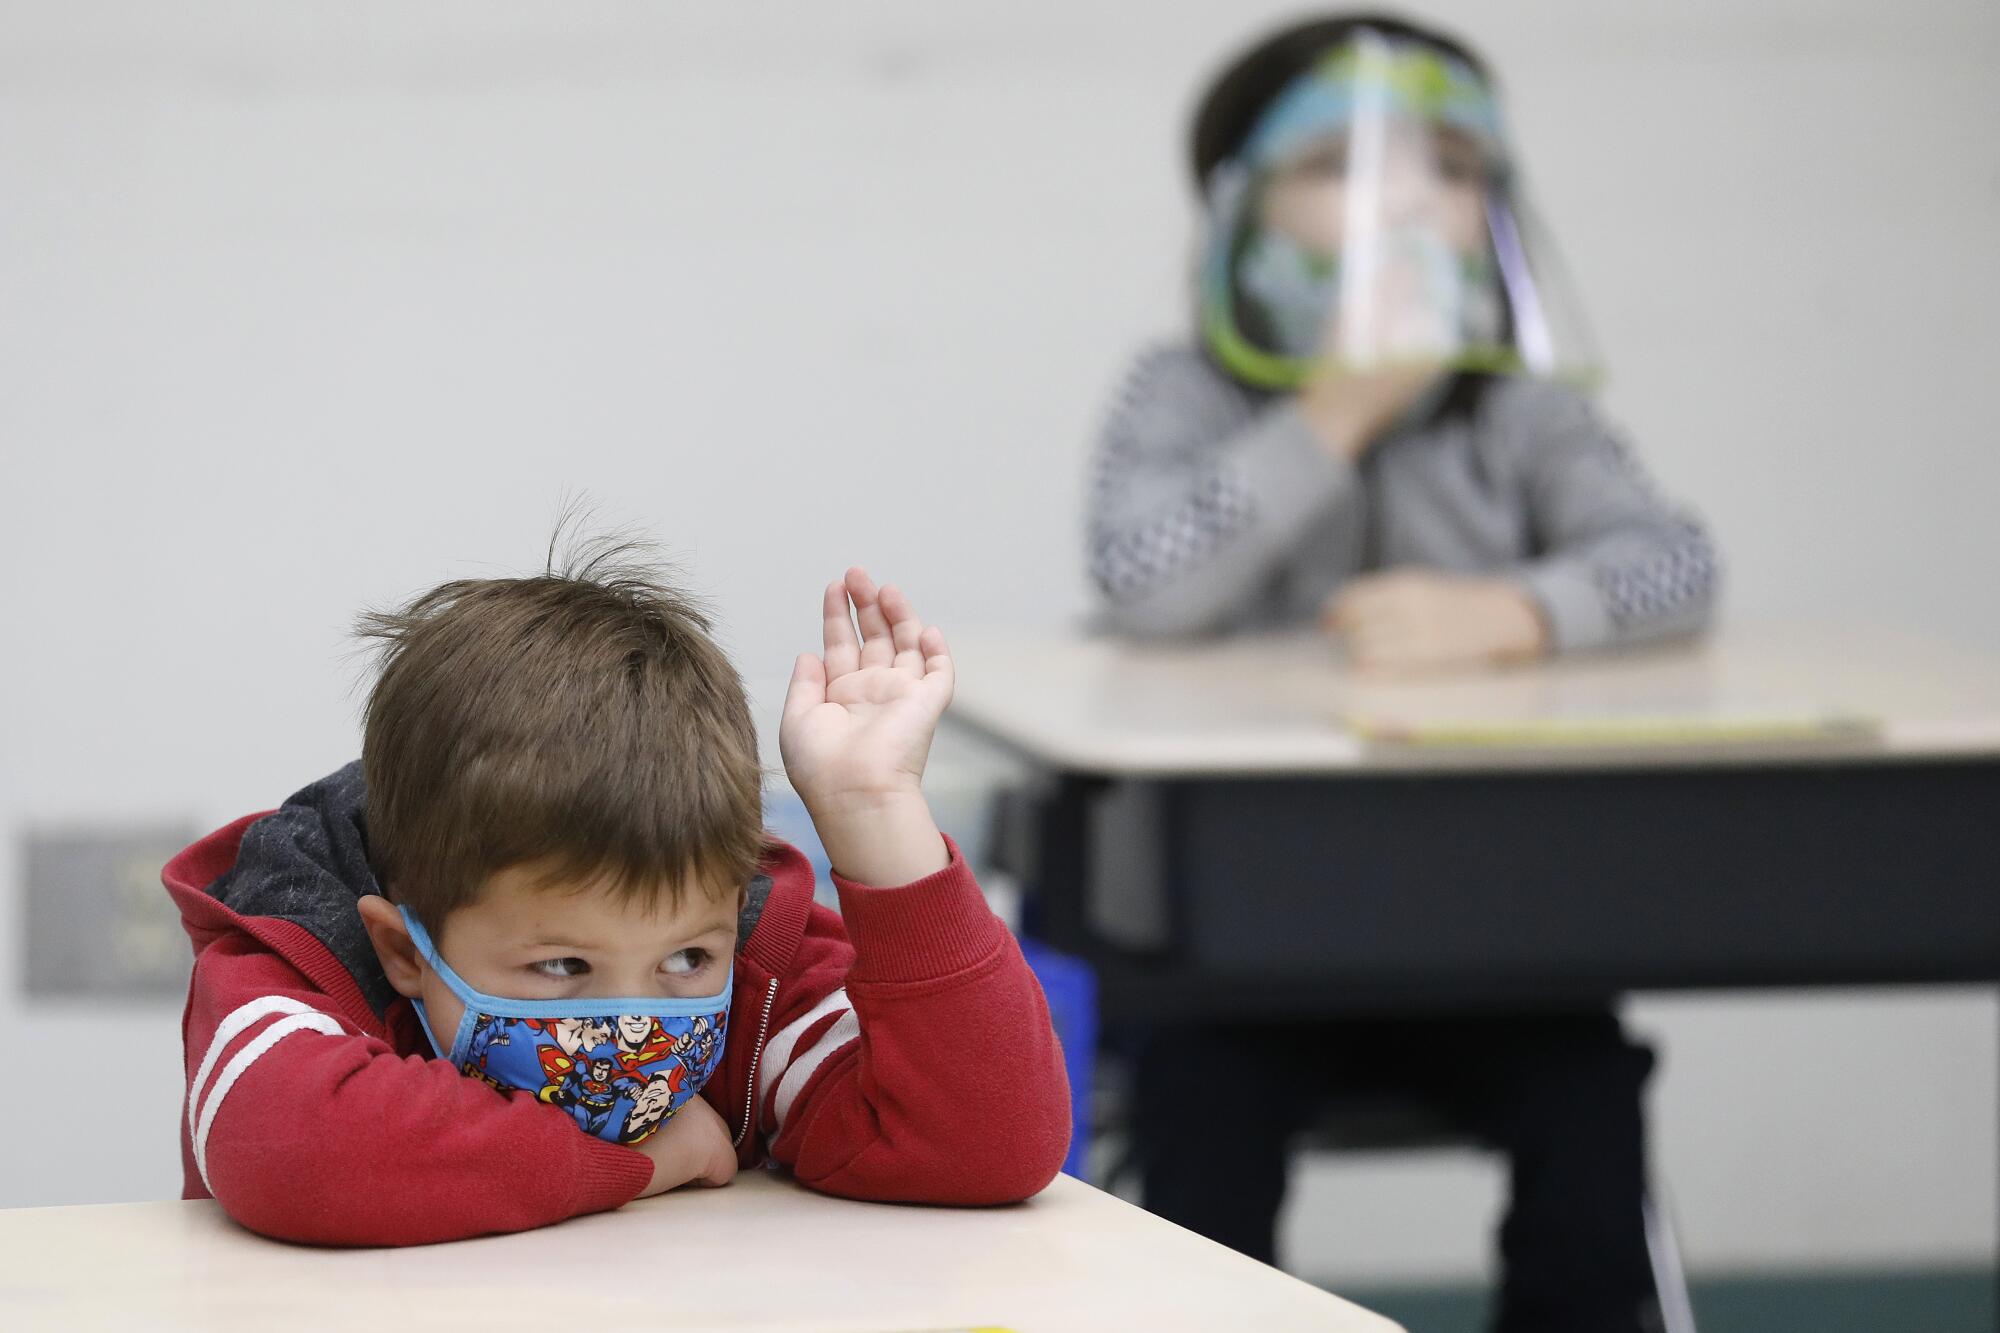 Nathan Marzouk raises his hand during class with kindergarten teacher Ursula Dysthe at Lupin Hill Elementary School.